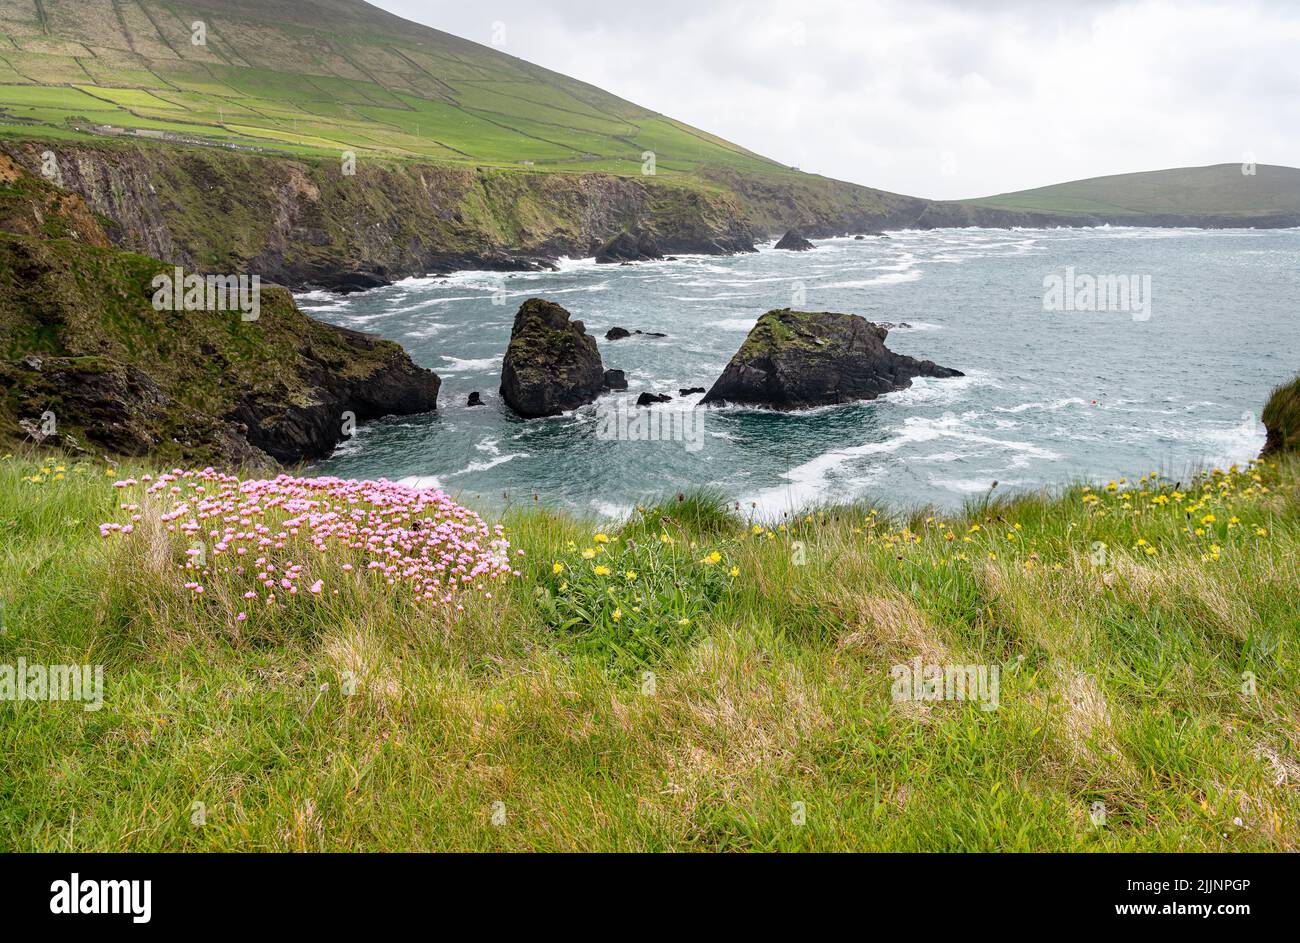 The Coastline Cliffs from Coumeenoole Beach on the south coast of Dunmore Head on the Dingle Peninsular in County Kerry, Ireland Stock Photo